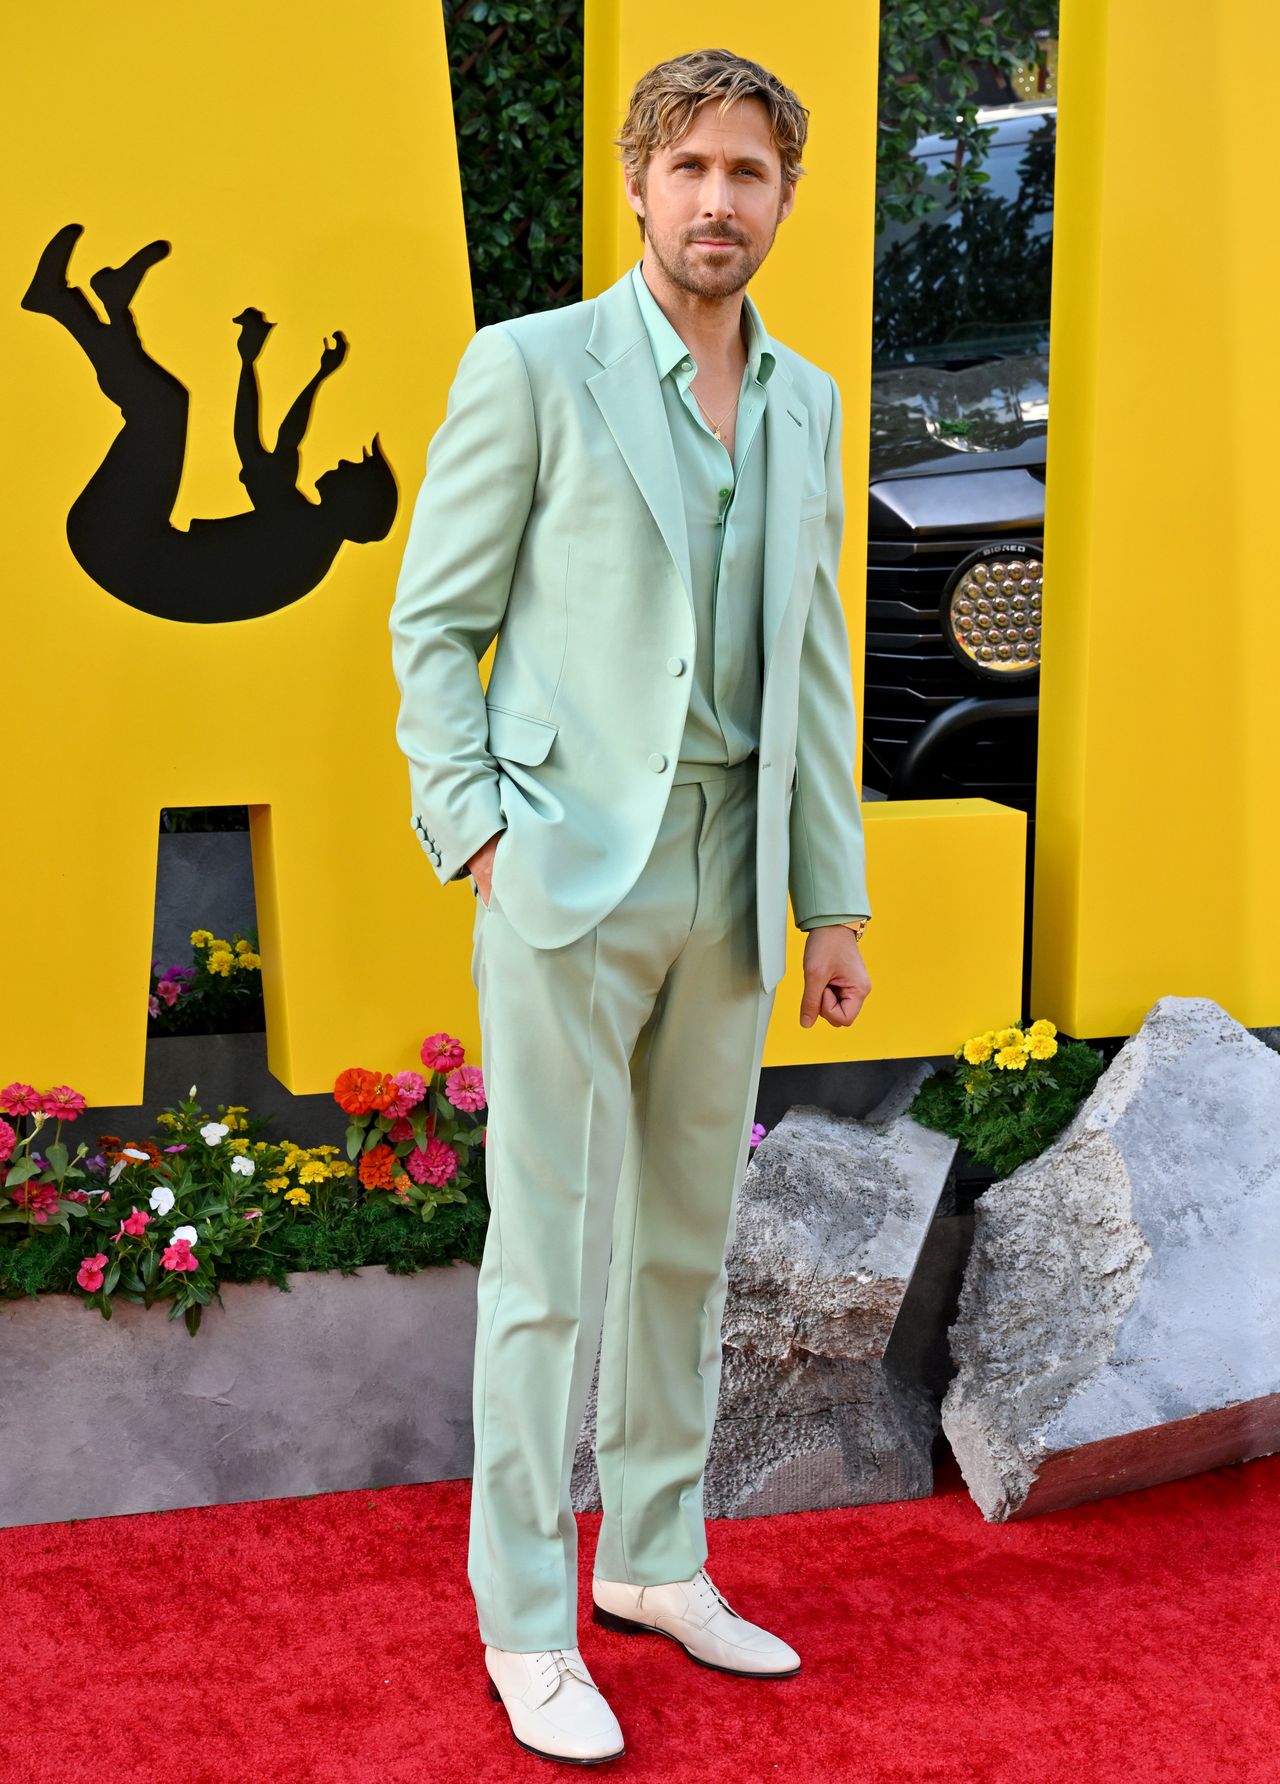 Ryan Gosling at the premiere of "The Stuntman"